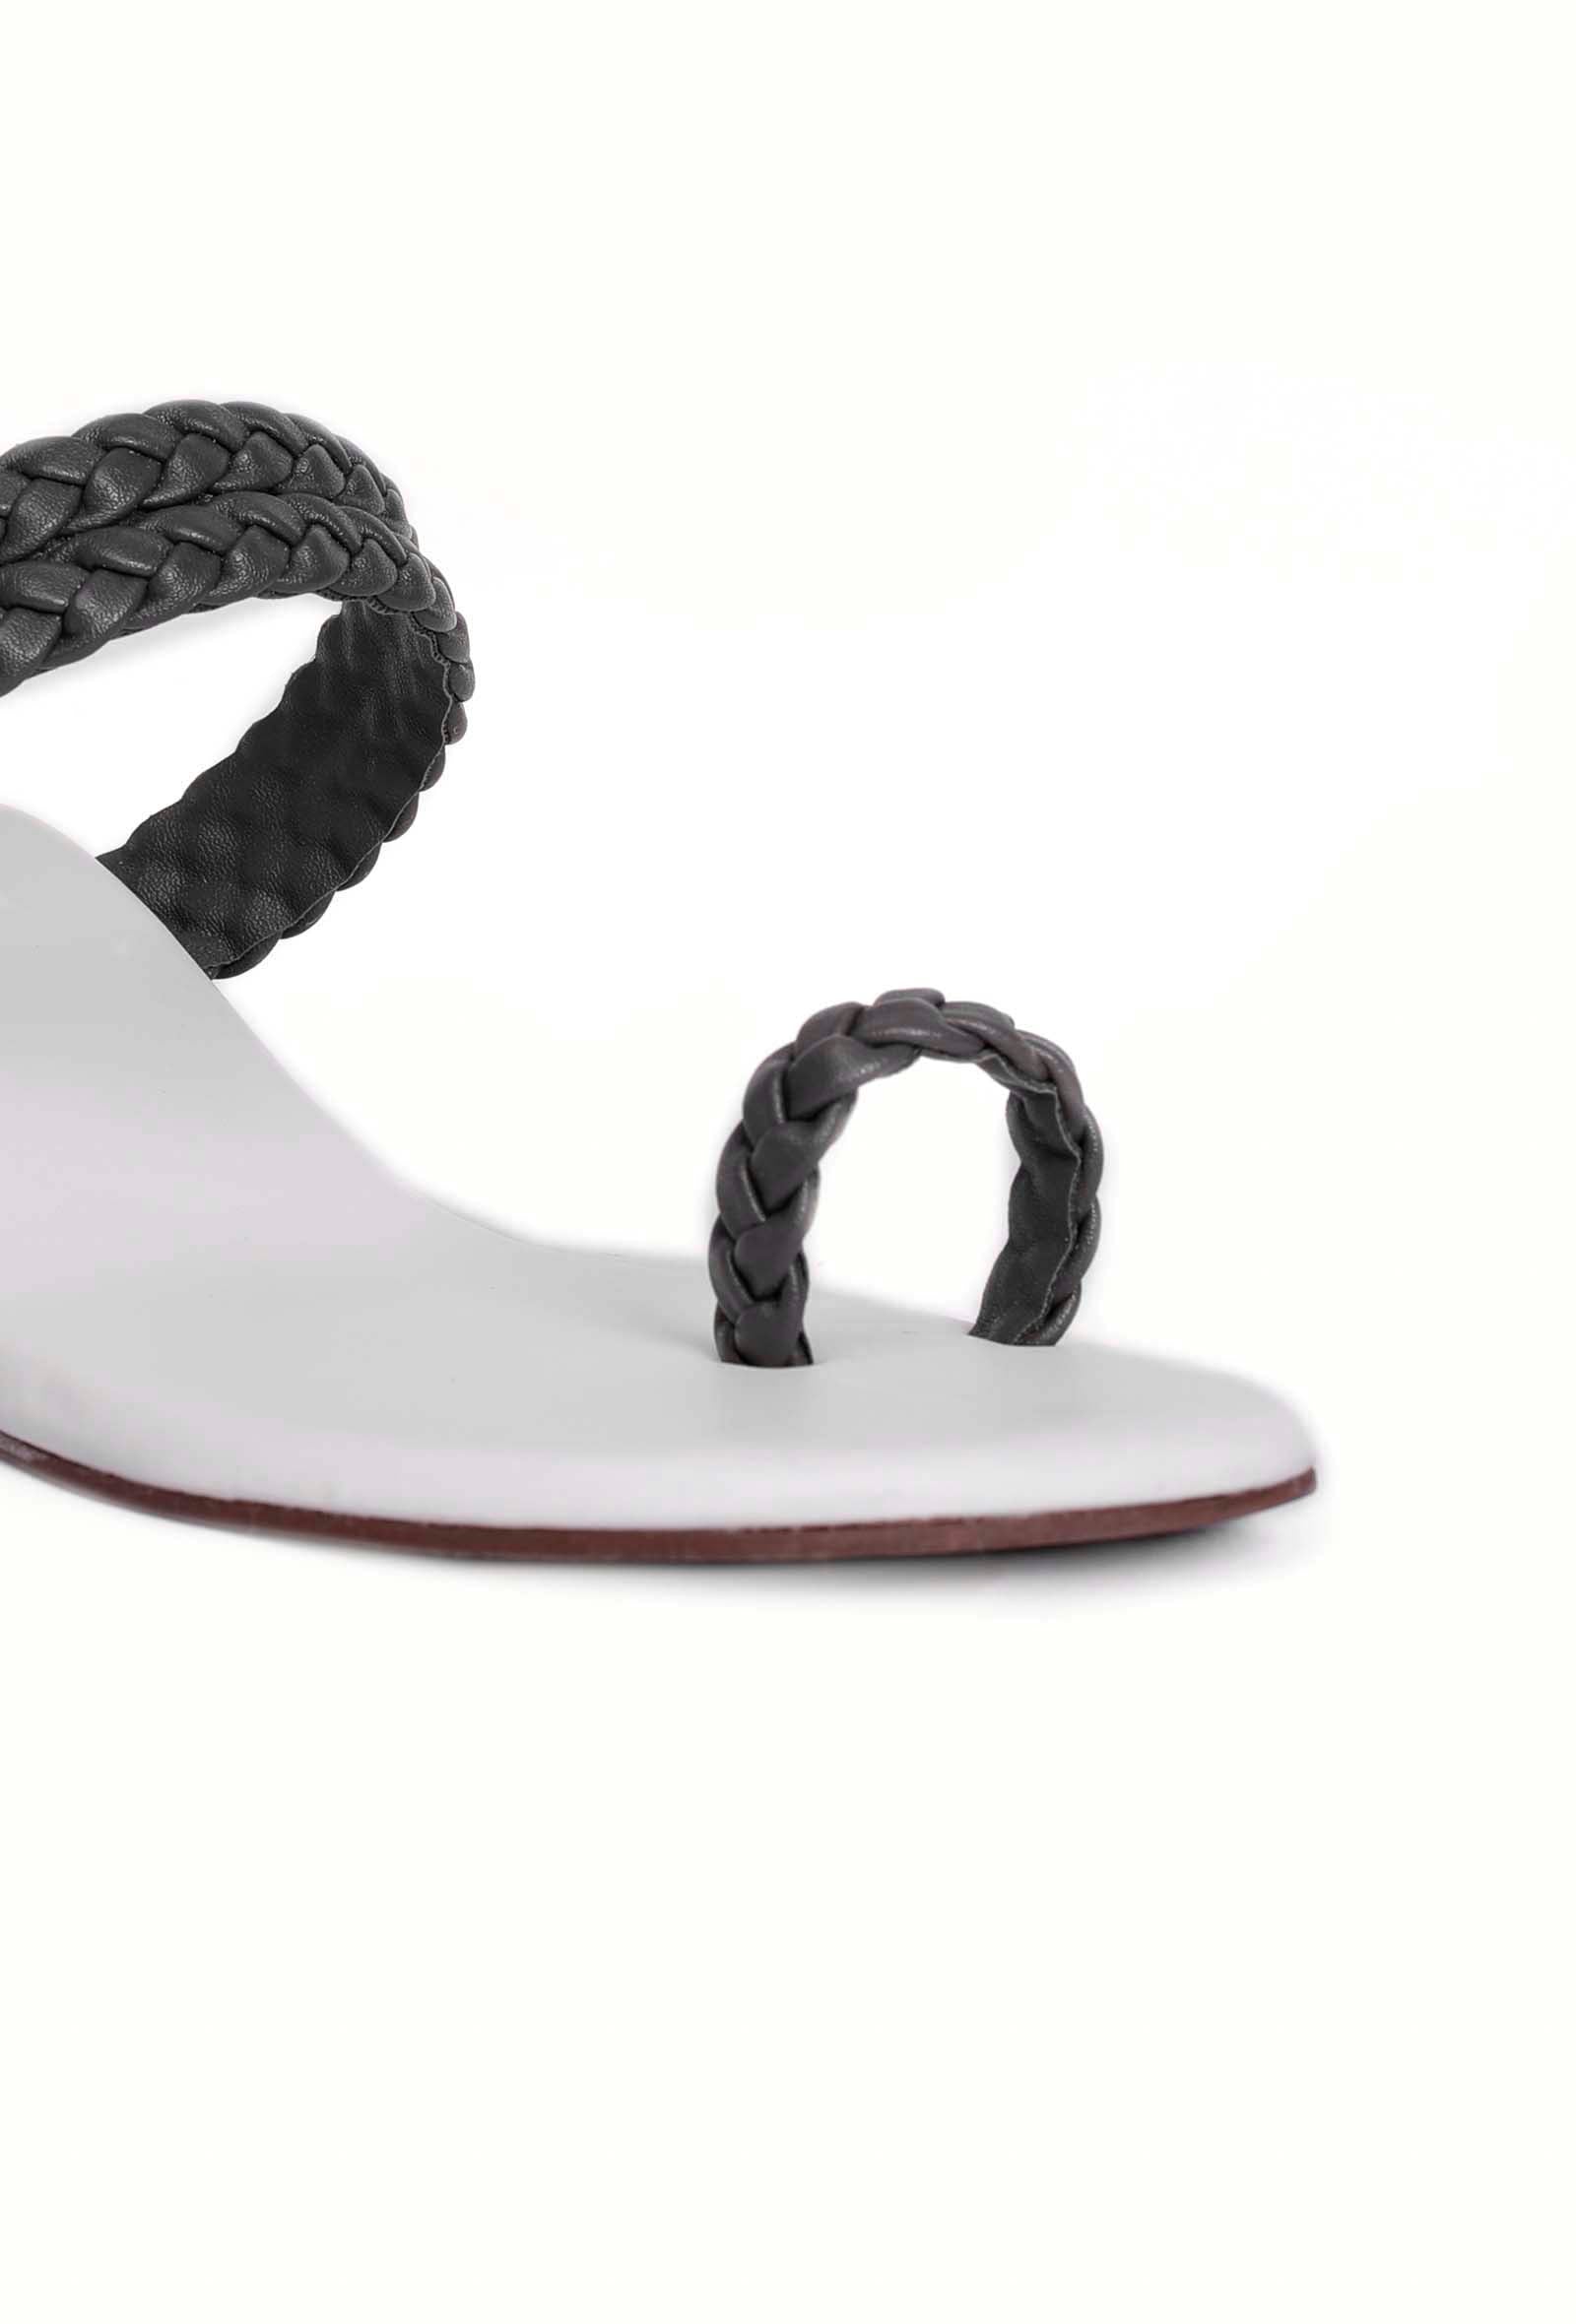 Onyx Black Knotted Cruelty Free Leather Sandals